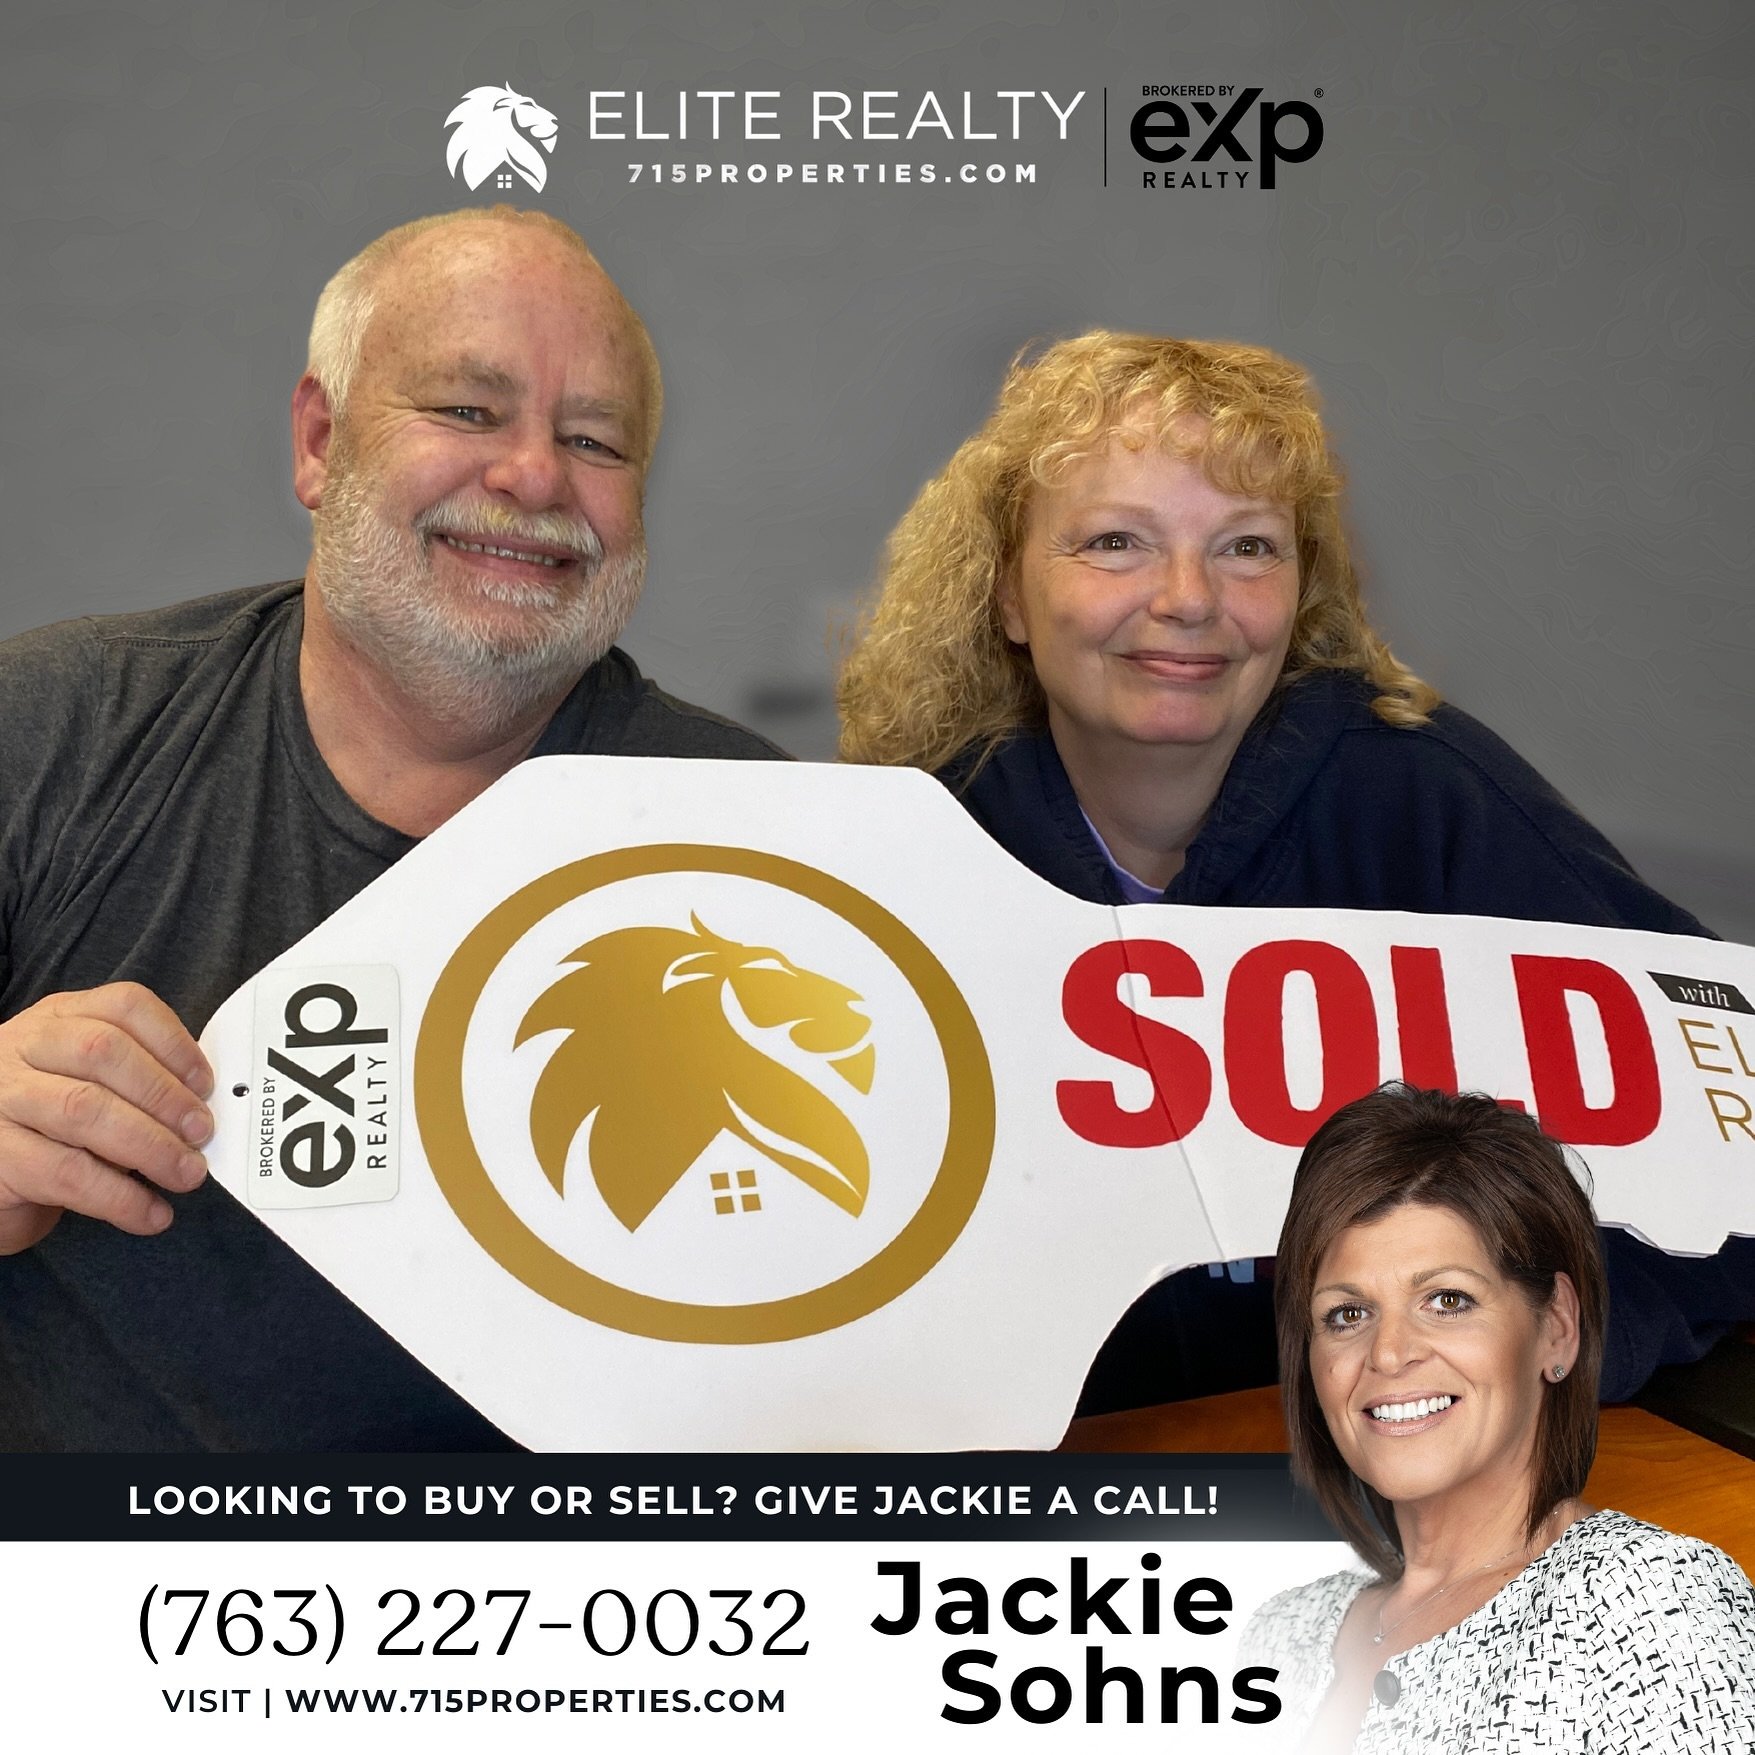 Congrats to Jackie&rsquo;s buyers on finding the perfect home 🏡 Thanks for trusting the Elite Realty Team! Are you considering buying or selling?📱 Call Jackie (763) 227-0032  #EliteRealtyTeam #Sold